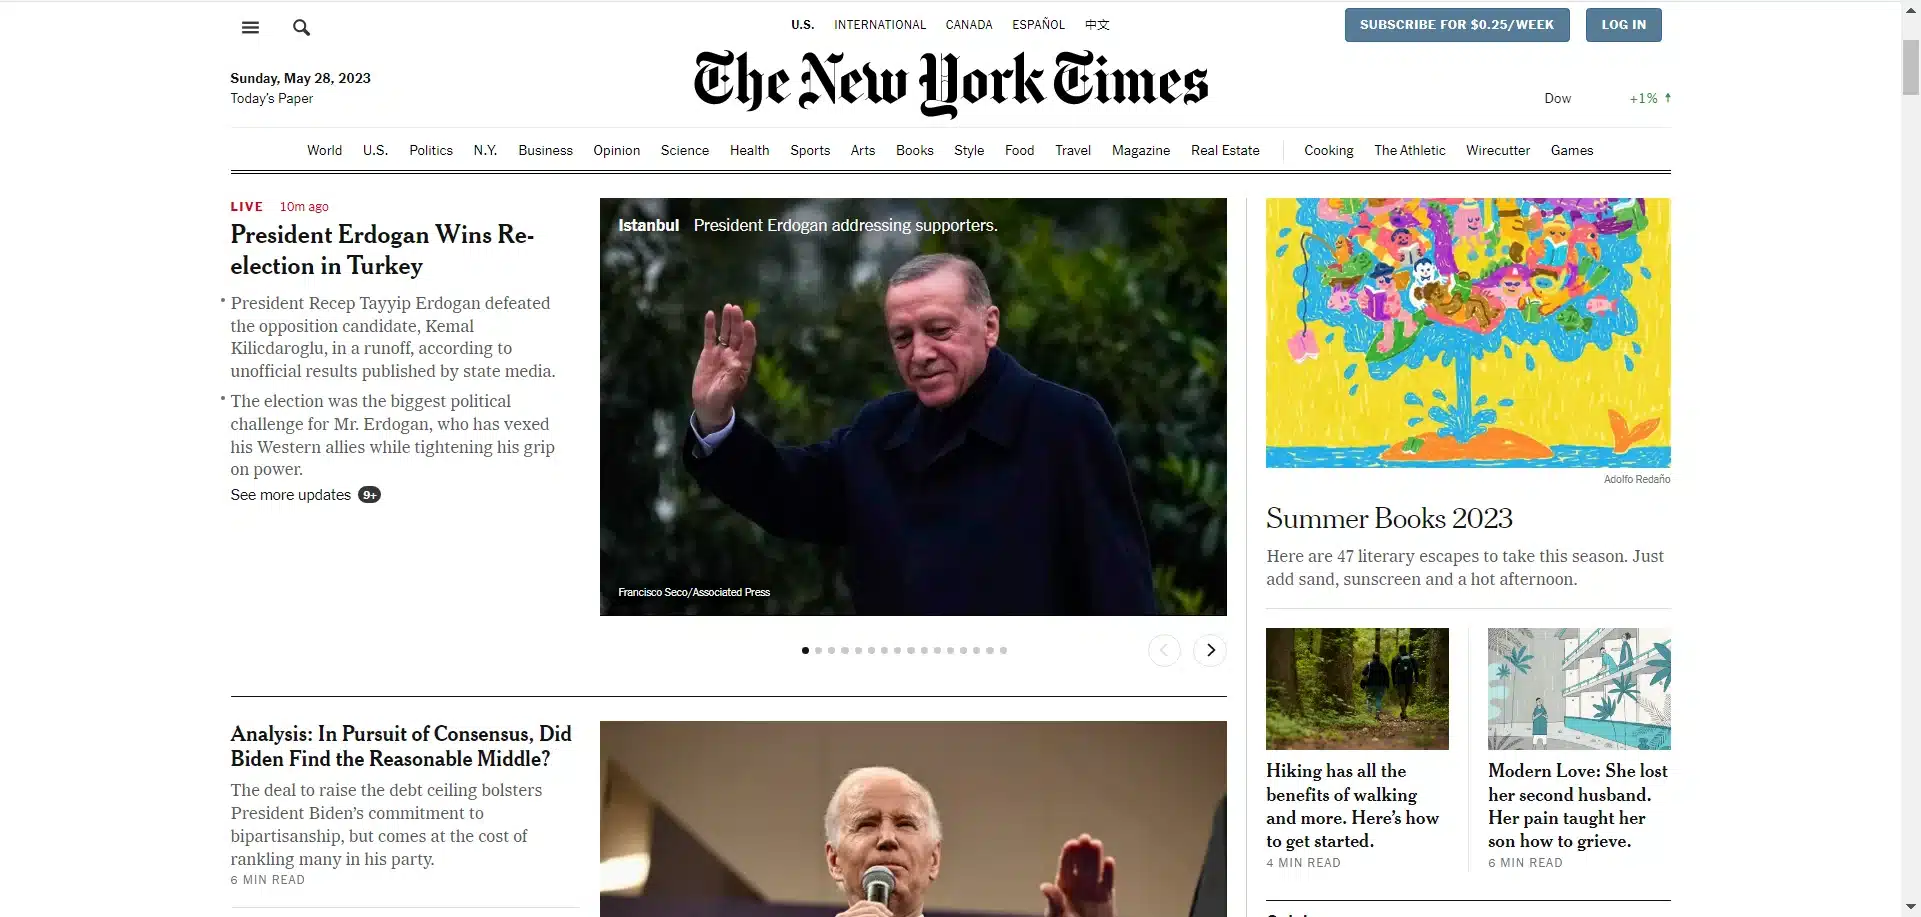 the new york times website image